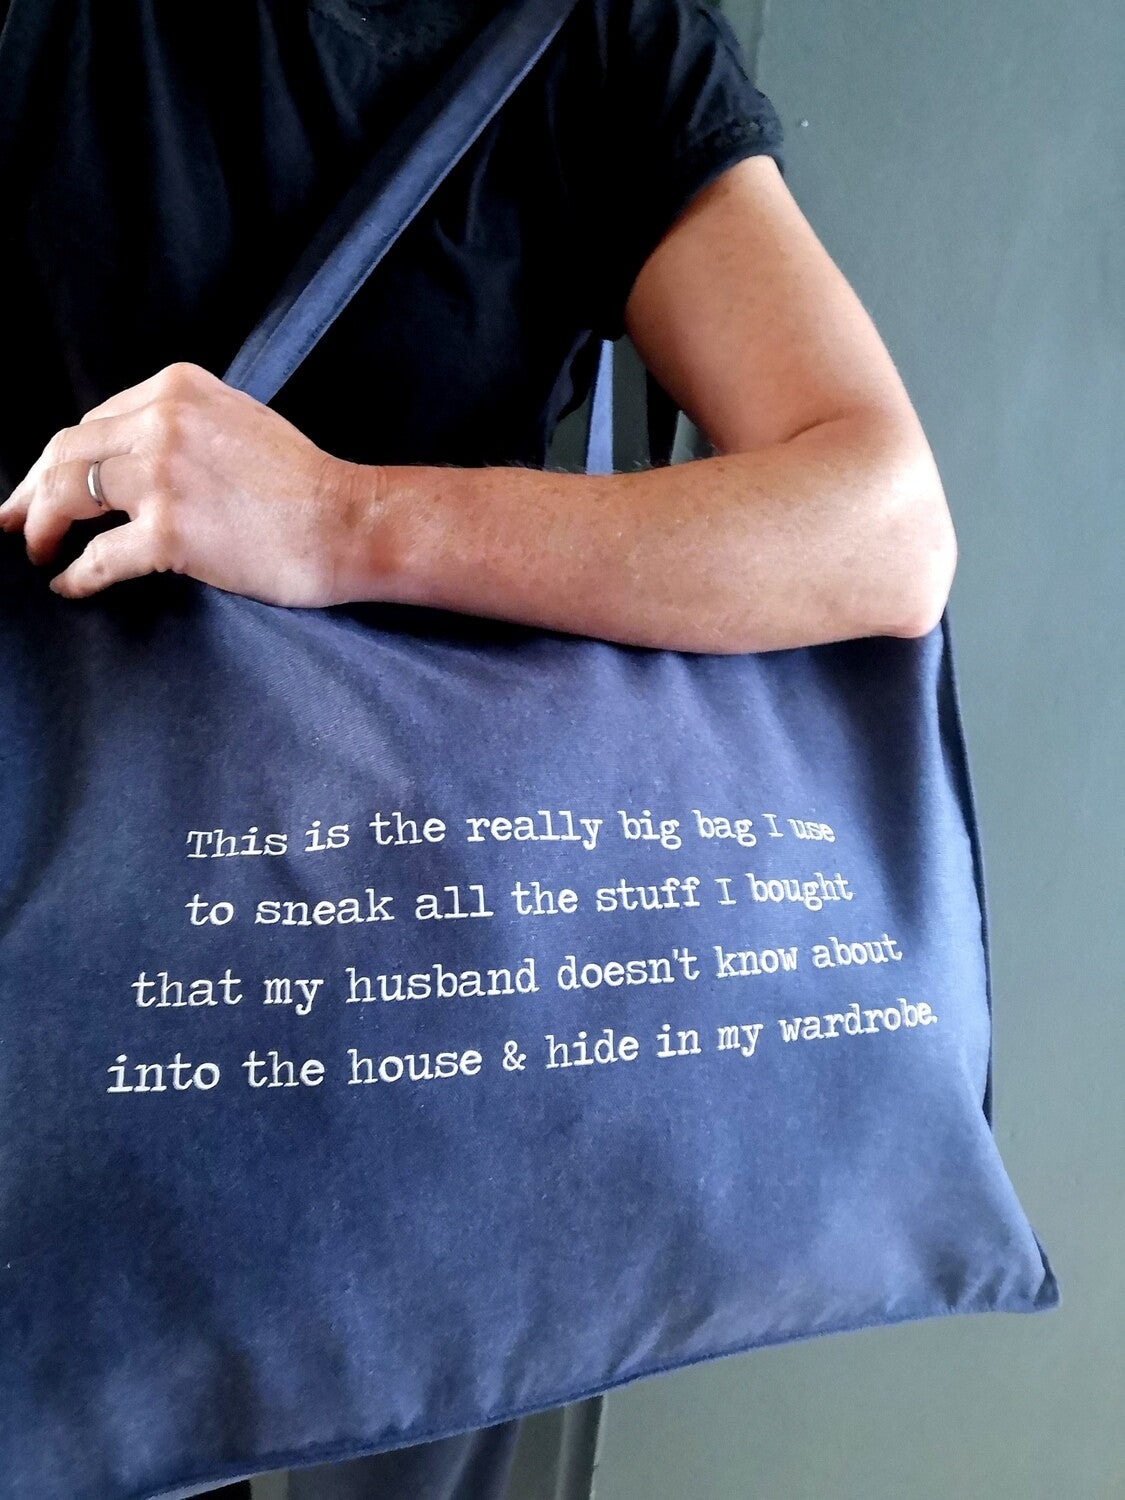 A woman carrying over her shoulder a large midnight blue organic cotton tote with the following text on it - This is the really big bag I use to sneak all the stuff I bought that my husband doesn't know about into the house & hide in my wardrobe.